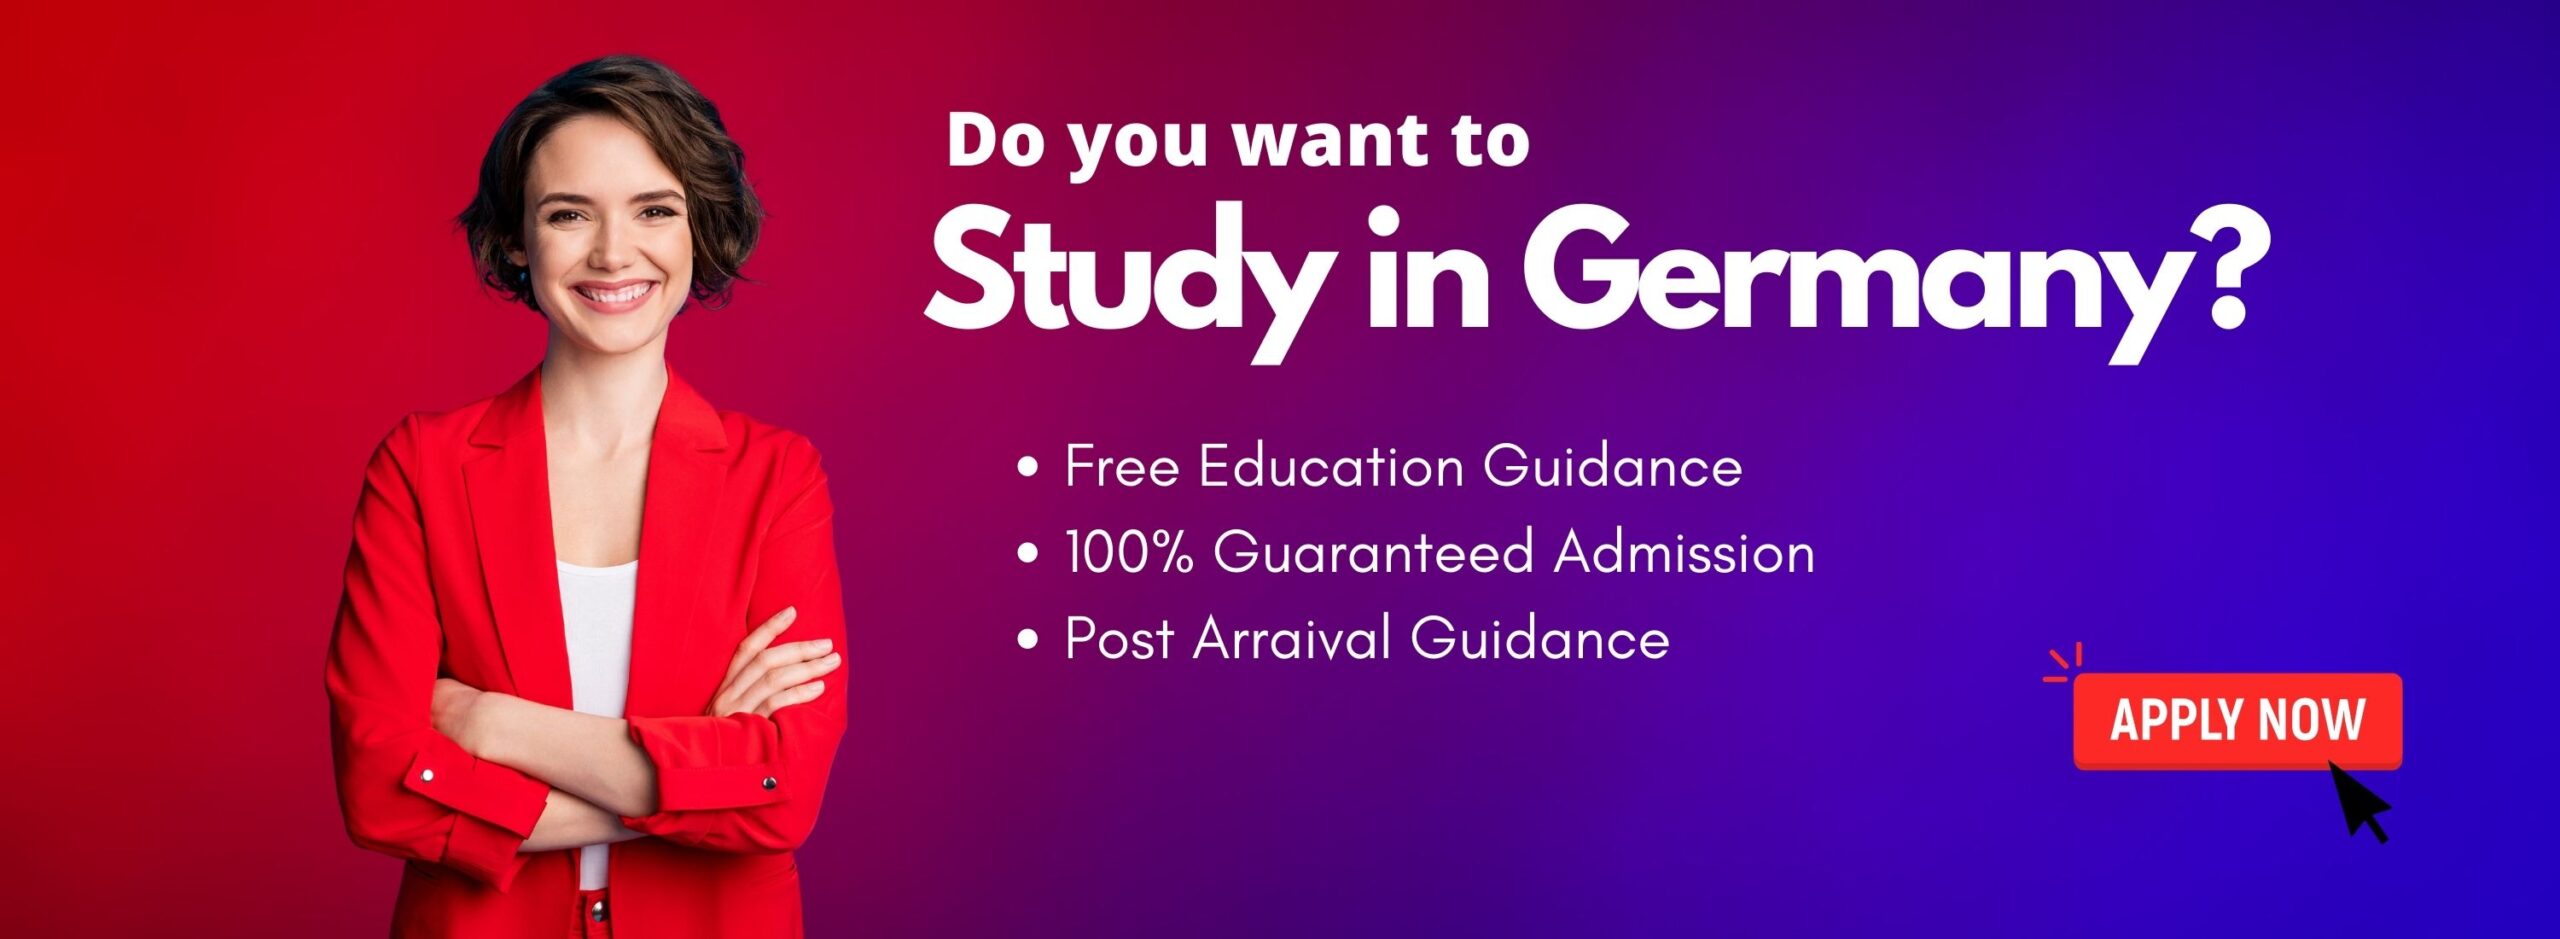 Study in Germany - KCR CONSULTANTS